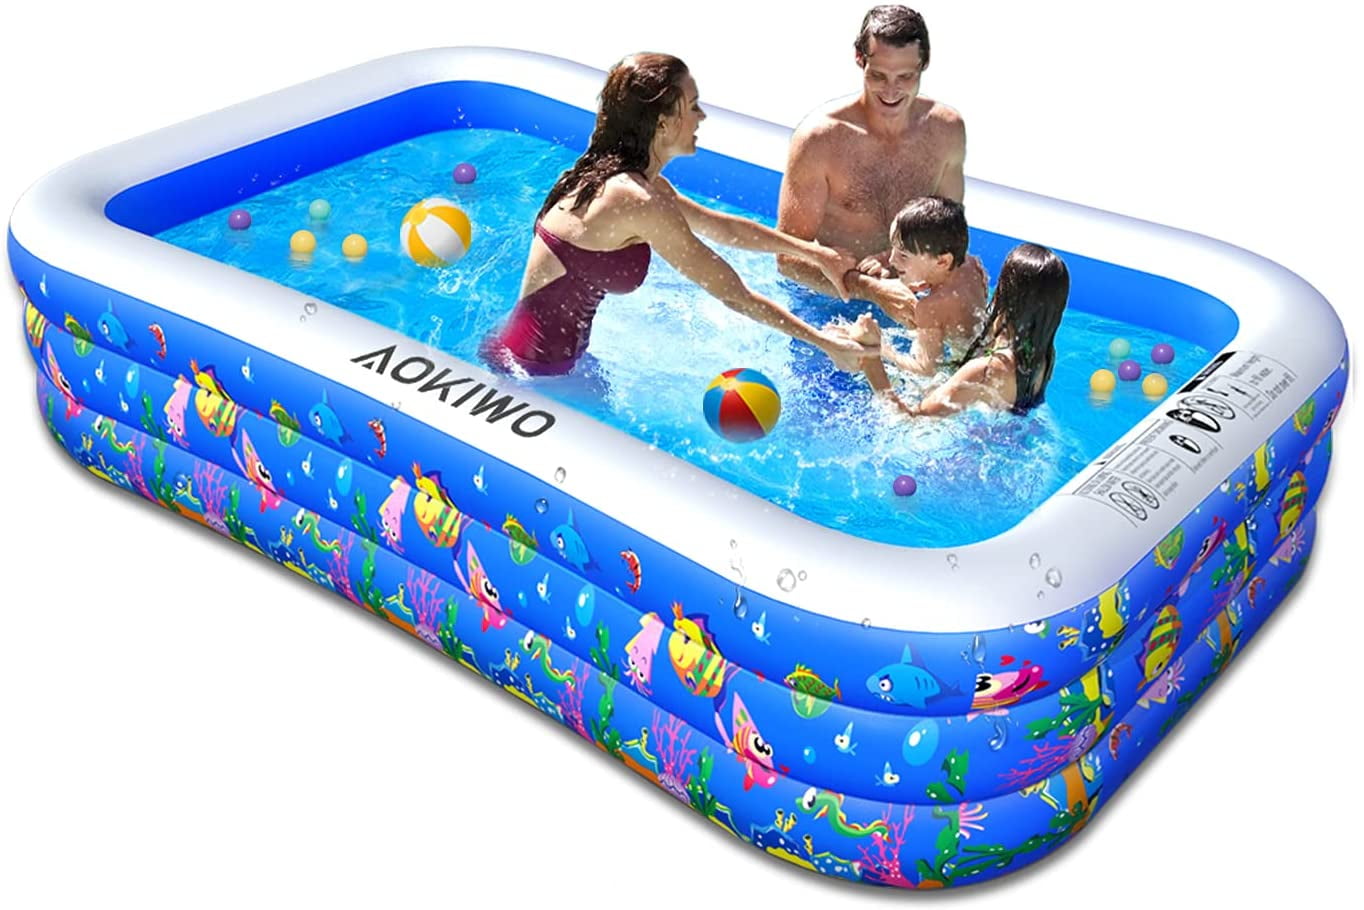 Family Inflatable Swimming Pool Garden 70.86 X 55.11 X 23.62 Full-Sized Inflatable Lounge Pool for Baby Infant Kids Outdoor Toddlers Adults Summer Water Party Kiddie Backyard 